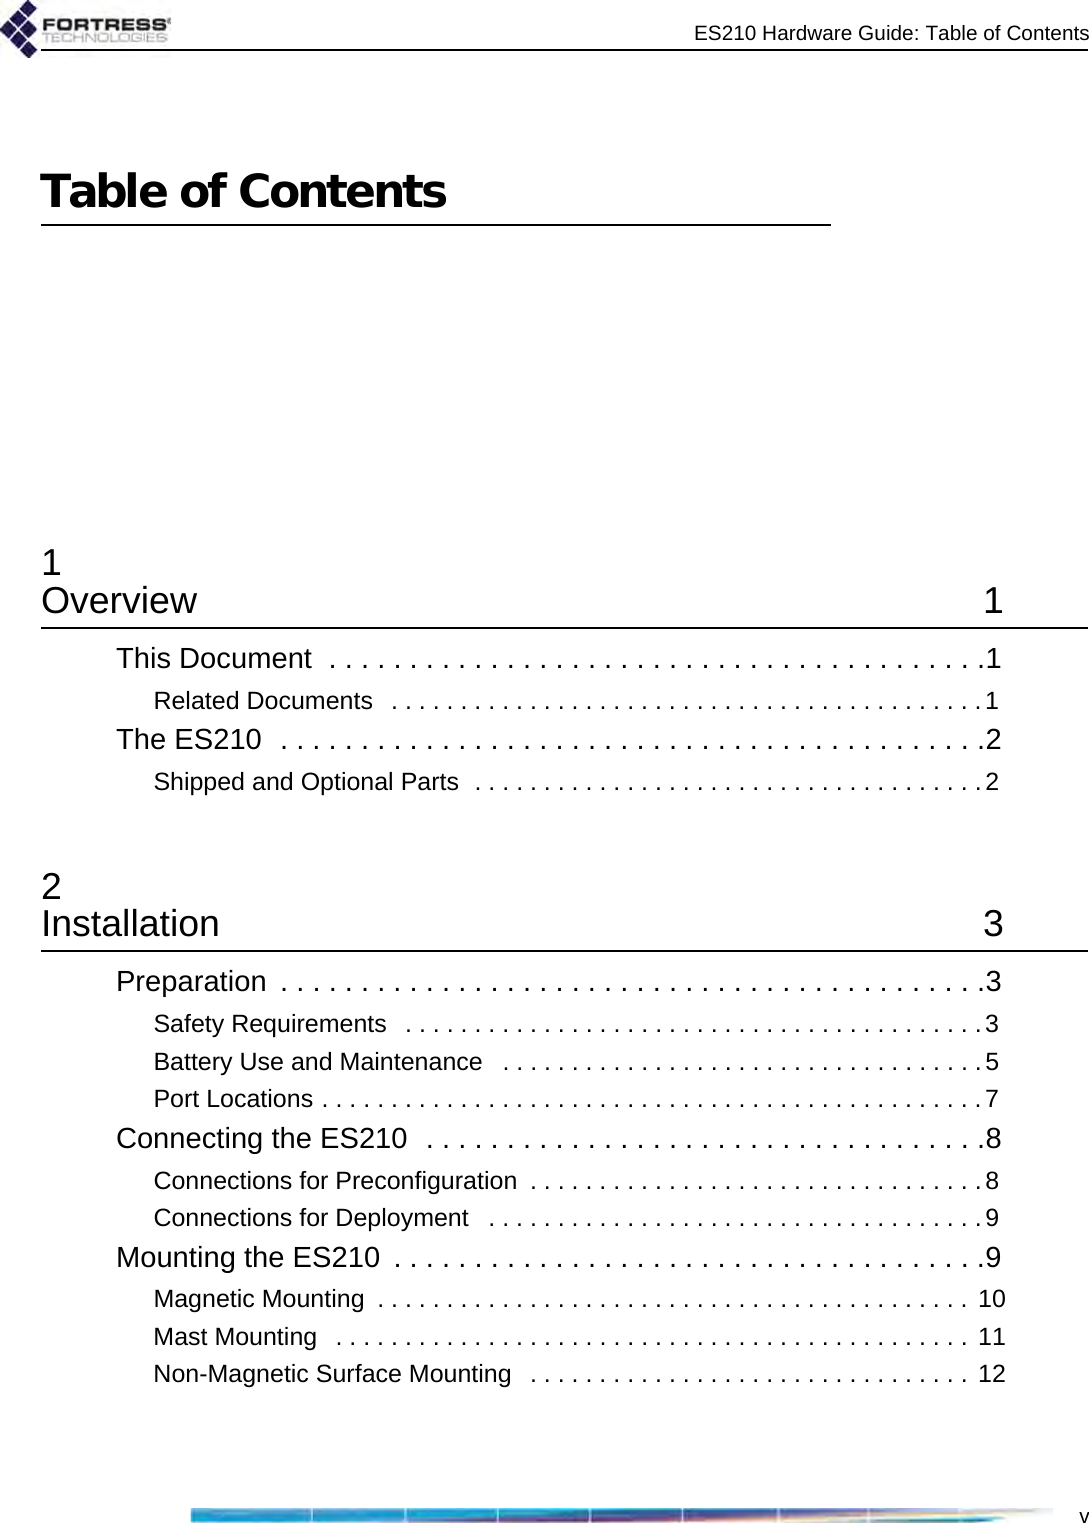 ES210 Hardware Guide: Table of ContentsvTable of Contents1Overview 1This Document  . . . . . . . . . . . . . . . . . . . . . . . . . . . . . . . . . . . . . . . . .1Related Documents   . . . . . . . . . . . . . . . . . . . . . . . . . . . . . . . . . . . . . . . . . . .1The ES210  . . . . . . . . . . . . . . . . . . . . . . . . . . . . . . . . . . . . . . . . . . . .2Shipped and Optional Parts  . . . . . . . . . . . . . . . . . . . . . . . . . . . . . . . . . . . . .22Installation 3Preparation  . . . . . . . . . . . . . . . . . . . . . . . . . . . . . . . . . . . . . . . . . . . .3Safety Requirements   . . . . . . . . . . . . . . . . . . . . . . . . . . . . . . . . . . . . . . . . . .3Battery Use and Maintenance   . . . . . . . . . . . . . . . . . . . . . . . . . . . . . . . . . . .5Port Locations . . . . . . . . . . . . . . . . . . . . . . . . . . . . . . . . . . . . . . . . . . . . . . . .7Connecting the ES210  . . . . . . . . . . . . . . . . . . . . . . . . . . . . . . . . . . .8Connections for Preconfiguration  . . . . . . . . . . . . . . . . . . . . . . . . . . . . . . . . . 8Connections for Deployment   . . . . . . . . . . . . . . . . . . . . . . . . . . . . . . . . . . . .9Mounting the ES210  . . . . . . . . . . . . . . . . . . . . . . . . . . . . . . . . . . . . .9Magnetic Mounting  . . . . . . . . . . . . . . . . . . . . . . . . . . . . . . . . . . . . . . . . . . . 10Mast Mounting   . . . . . . . . . . . . . . . . . . . . . . . . . . . . . . . . . . . . . . . . . . . . . . 11Non-Magnetic Surface Mounting   . . . . . . . . . . . . . . . . . . . . . . . . . . . . . . . . 12